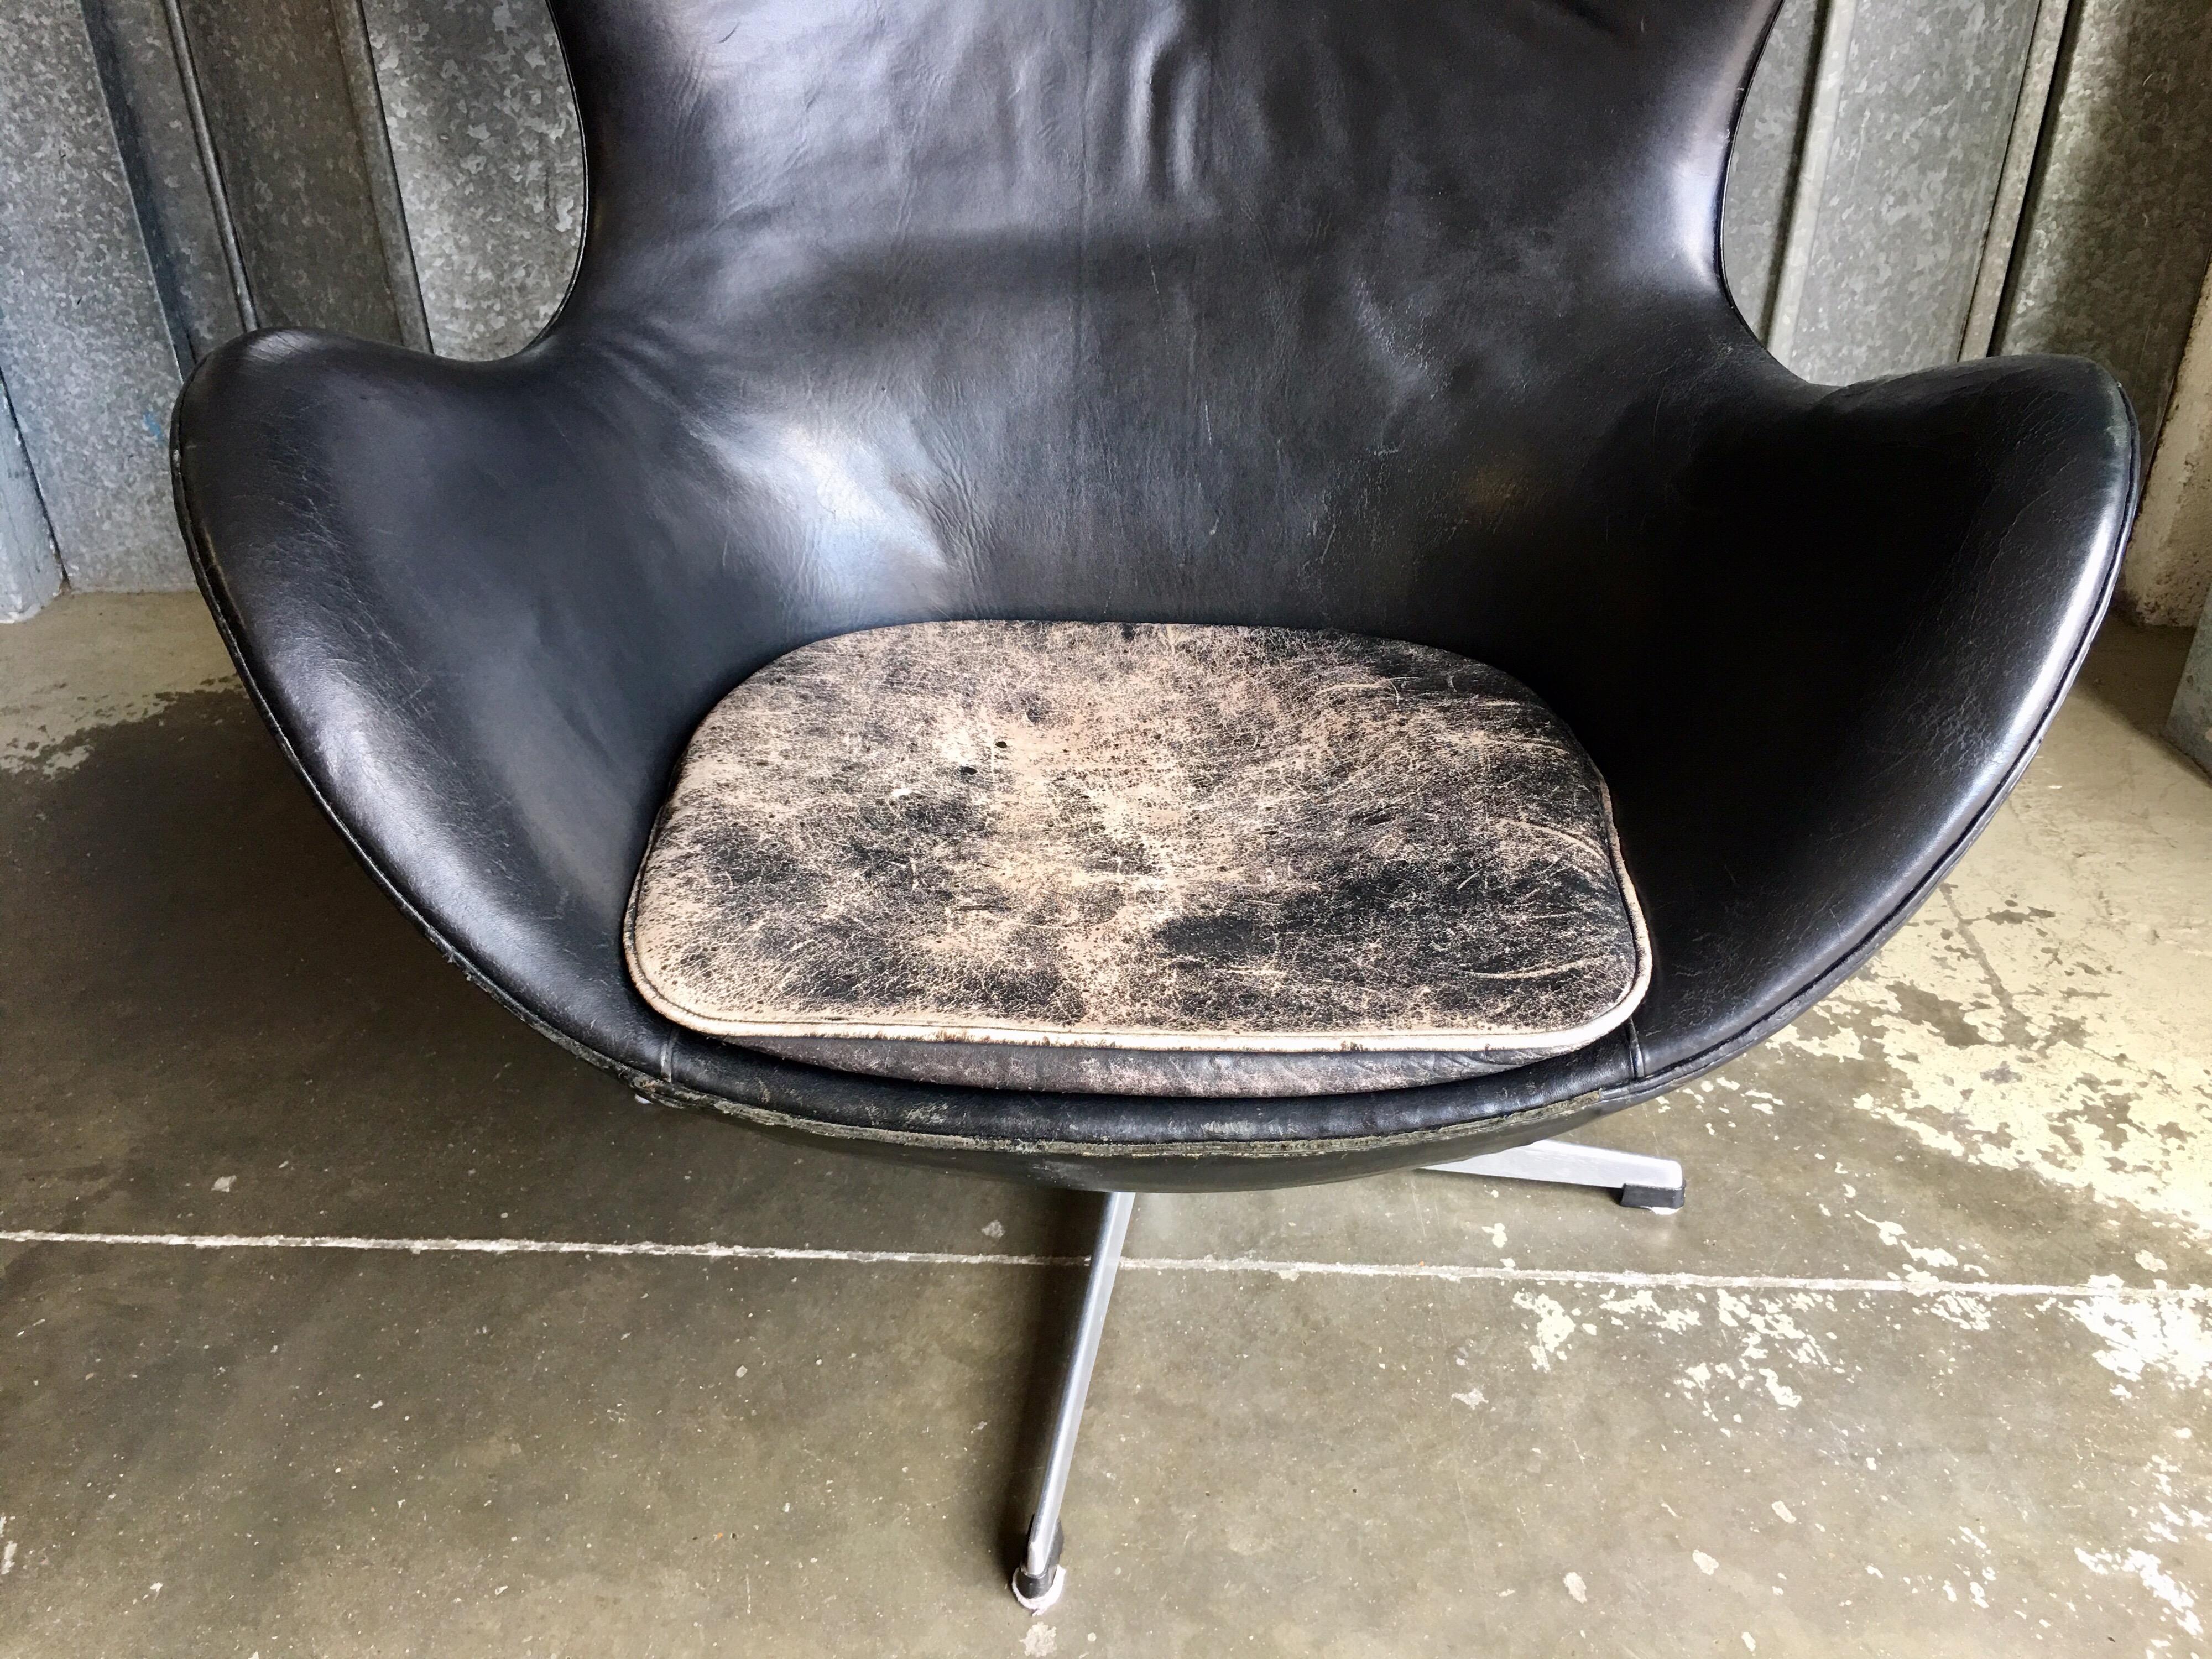 Arne Jacobsen Egg Chair in Black Leather, circa 1963 For Sale 4